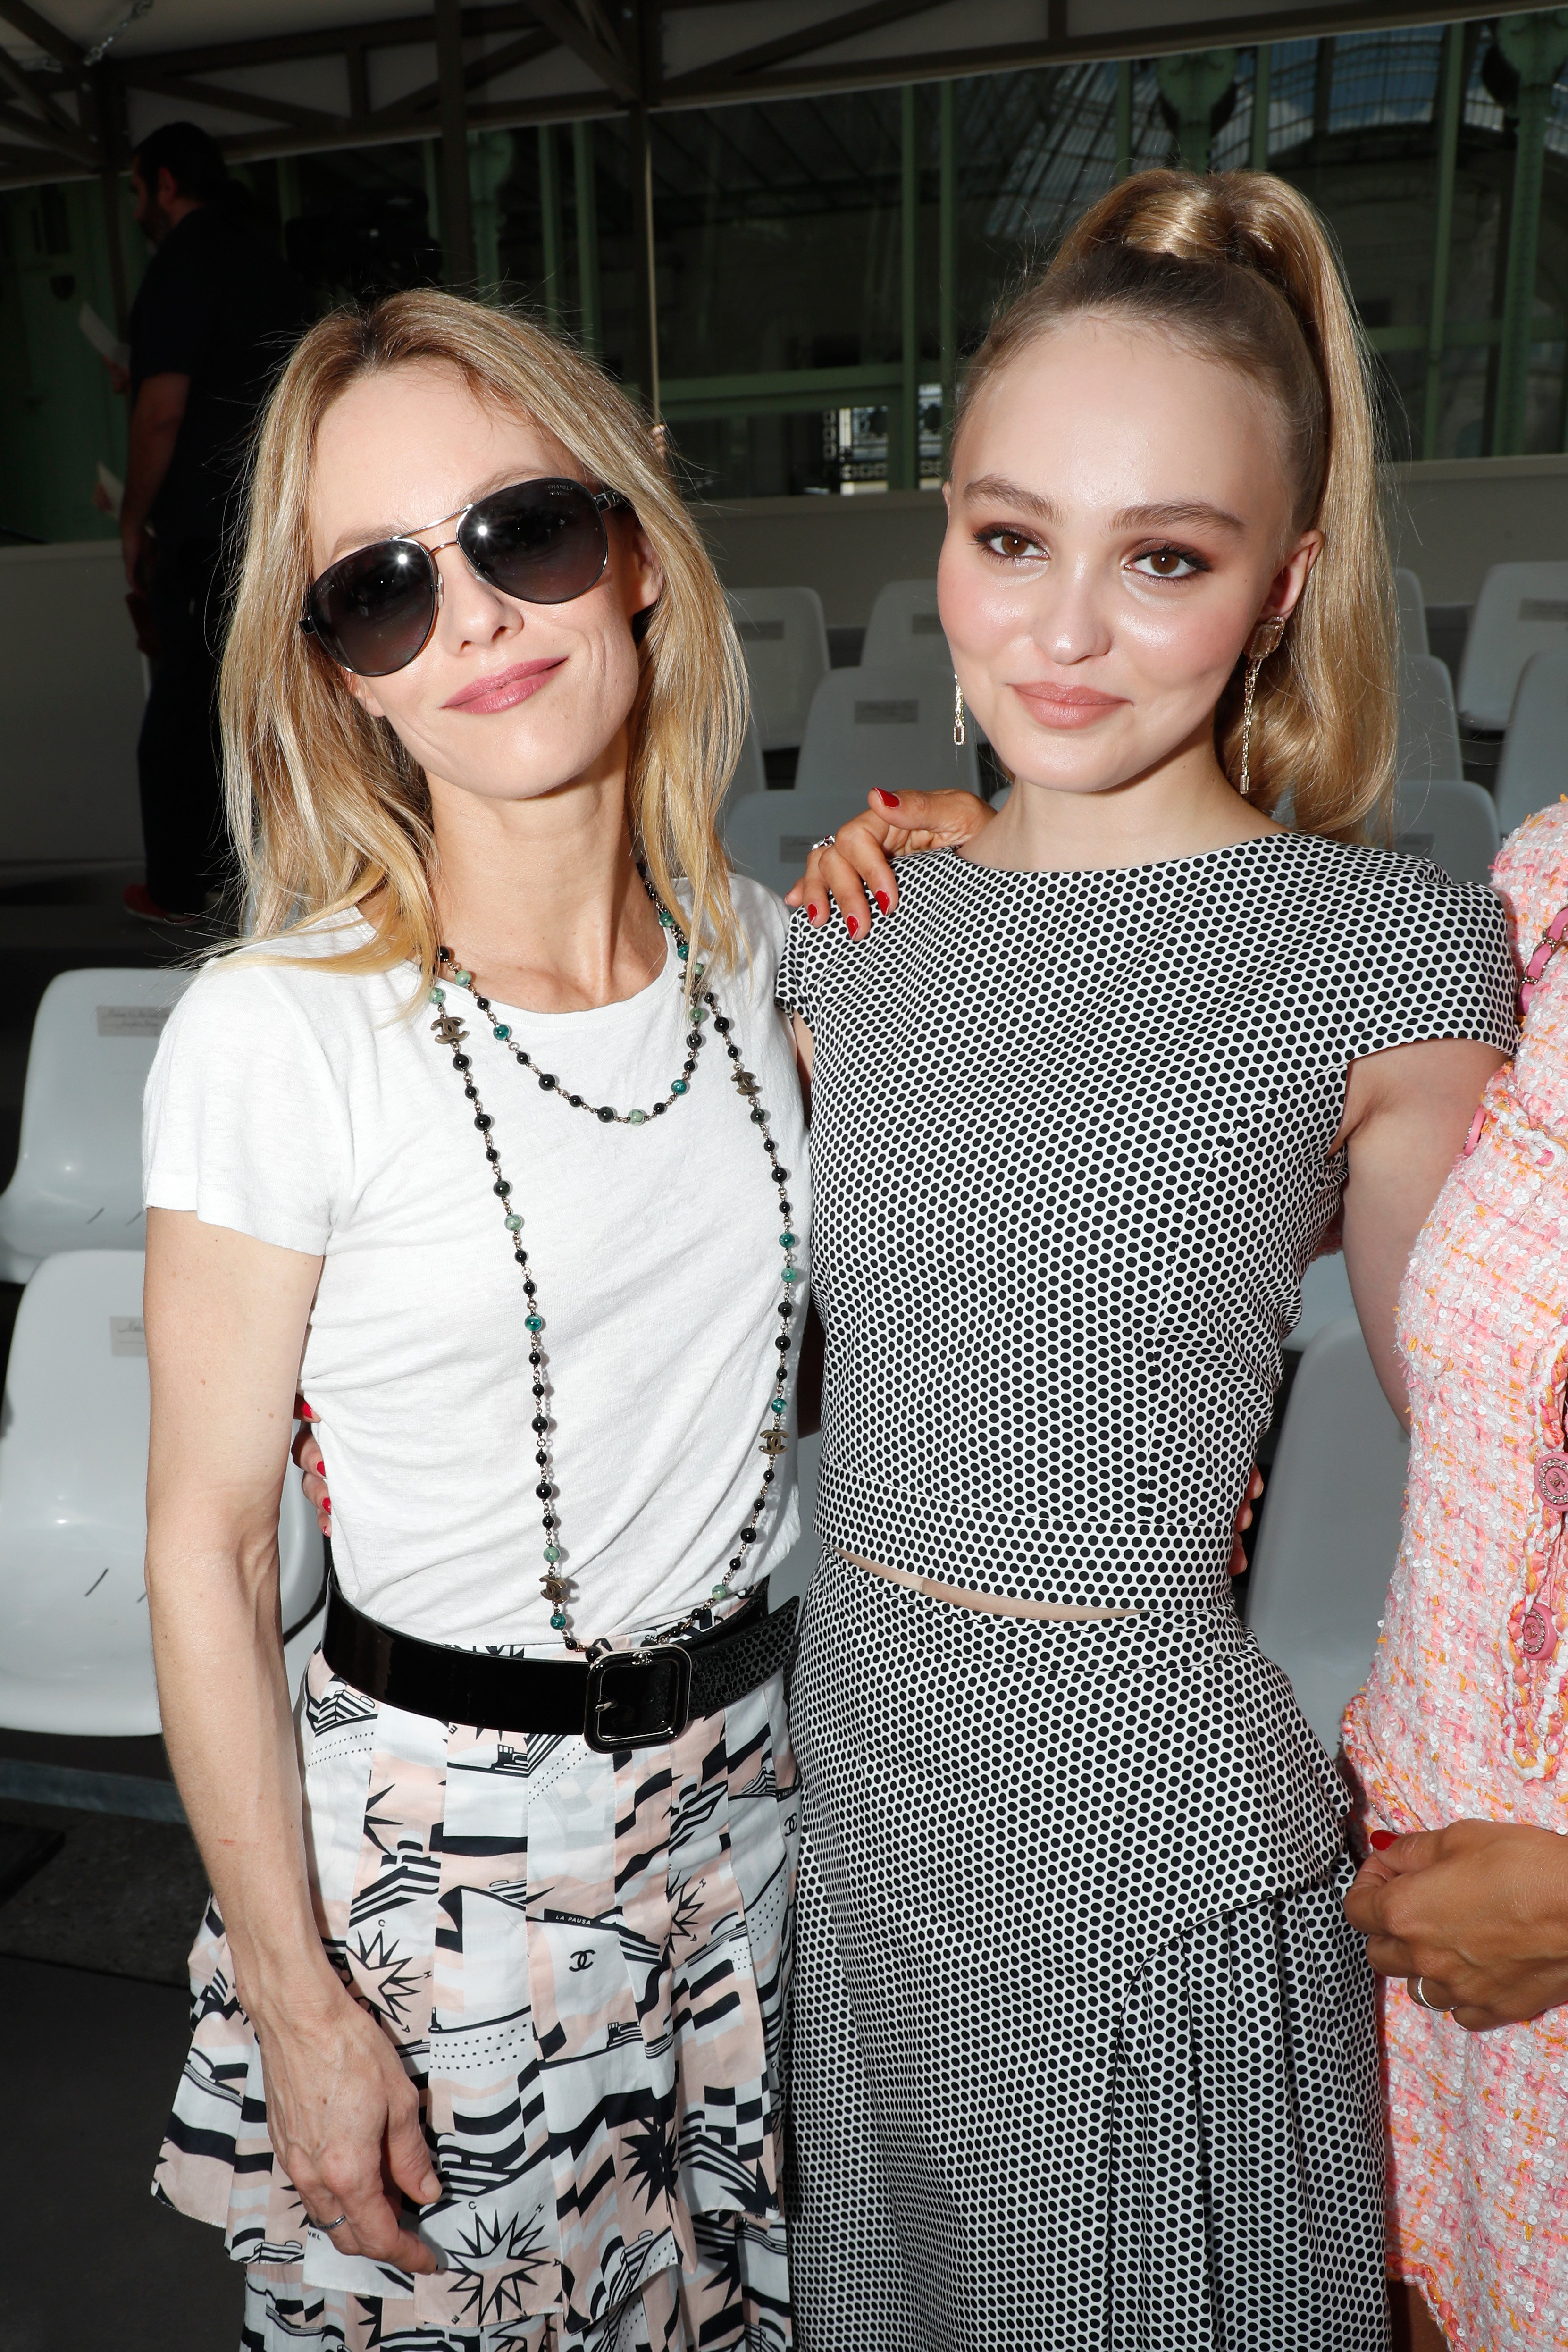 Vanessa Paradis and Lily-Rose Depp at the Chanel Haute Couture Fall Winter 2018/2019 show as part of Paris Fashion Week on July 3, 2018, in Paris, France. | Source: Getty Images